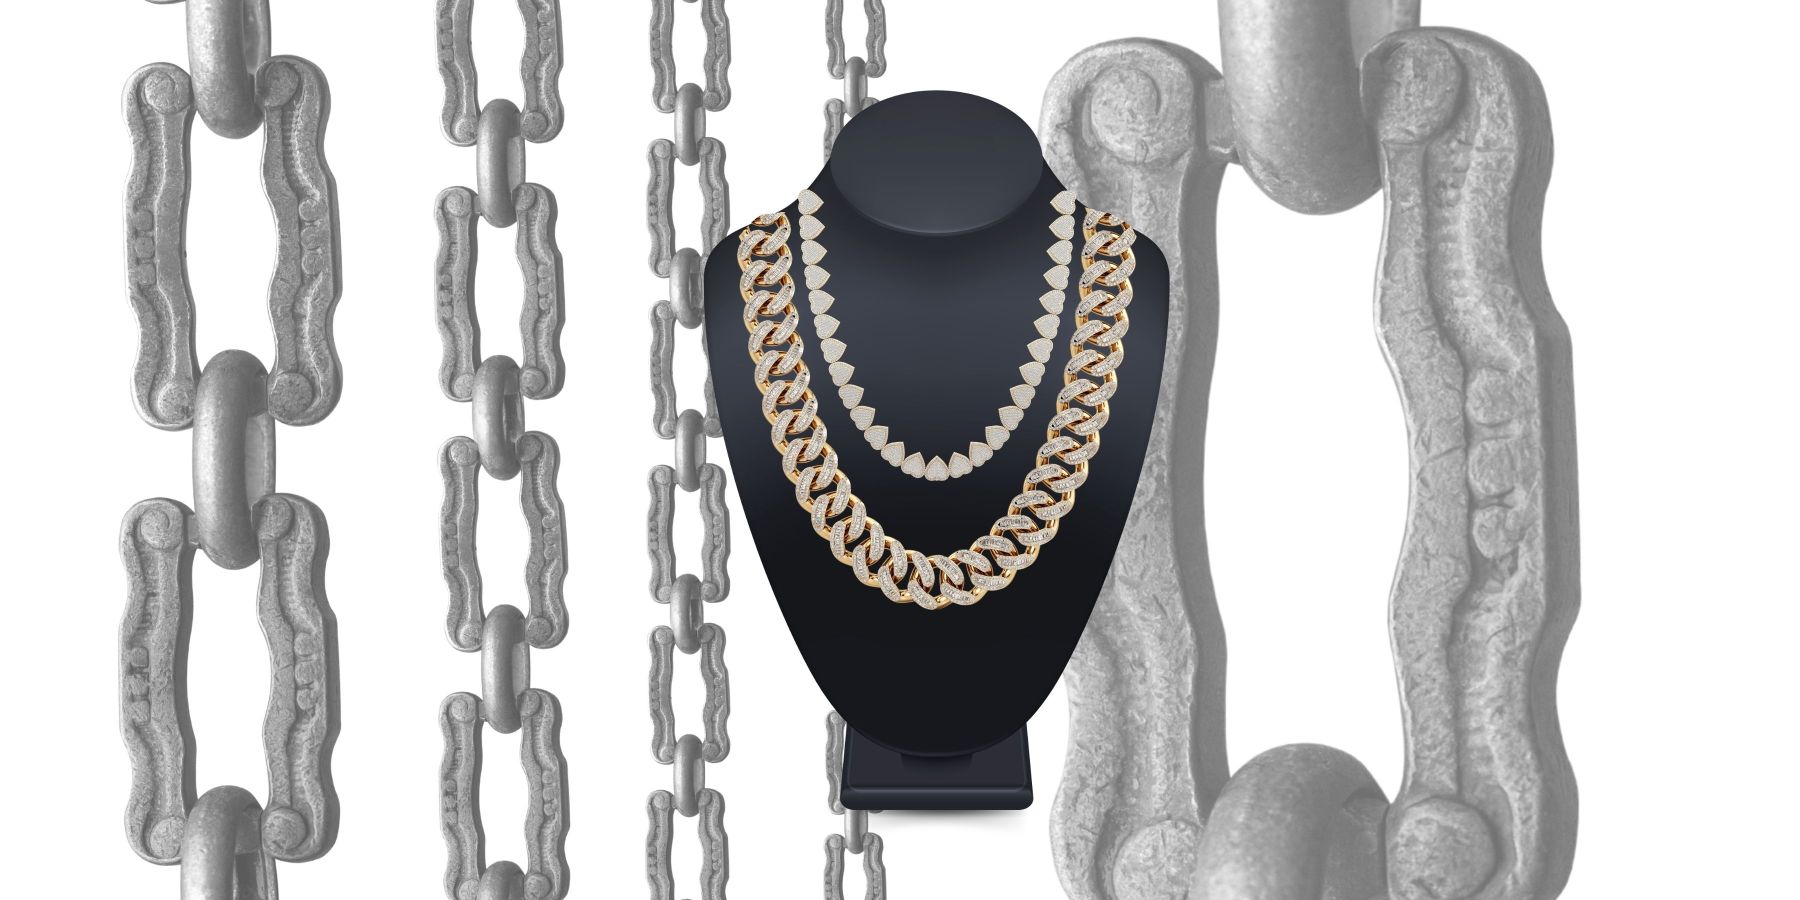 Unlocking Your Style: 10 Ways to Master Chain Stacking